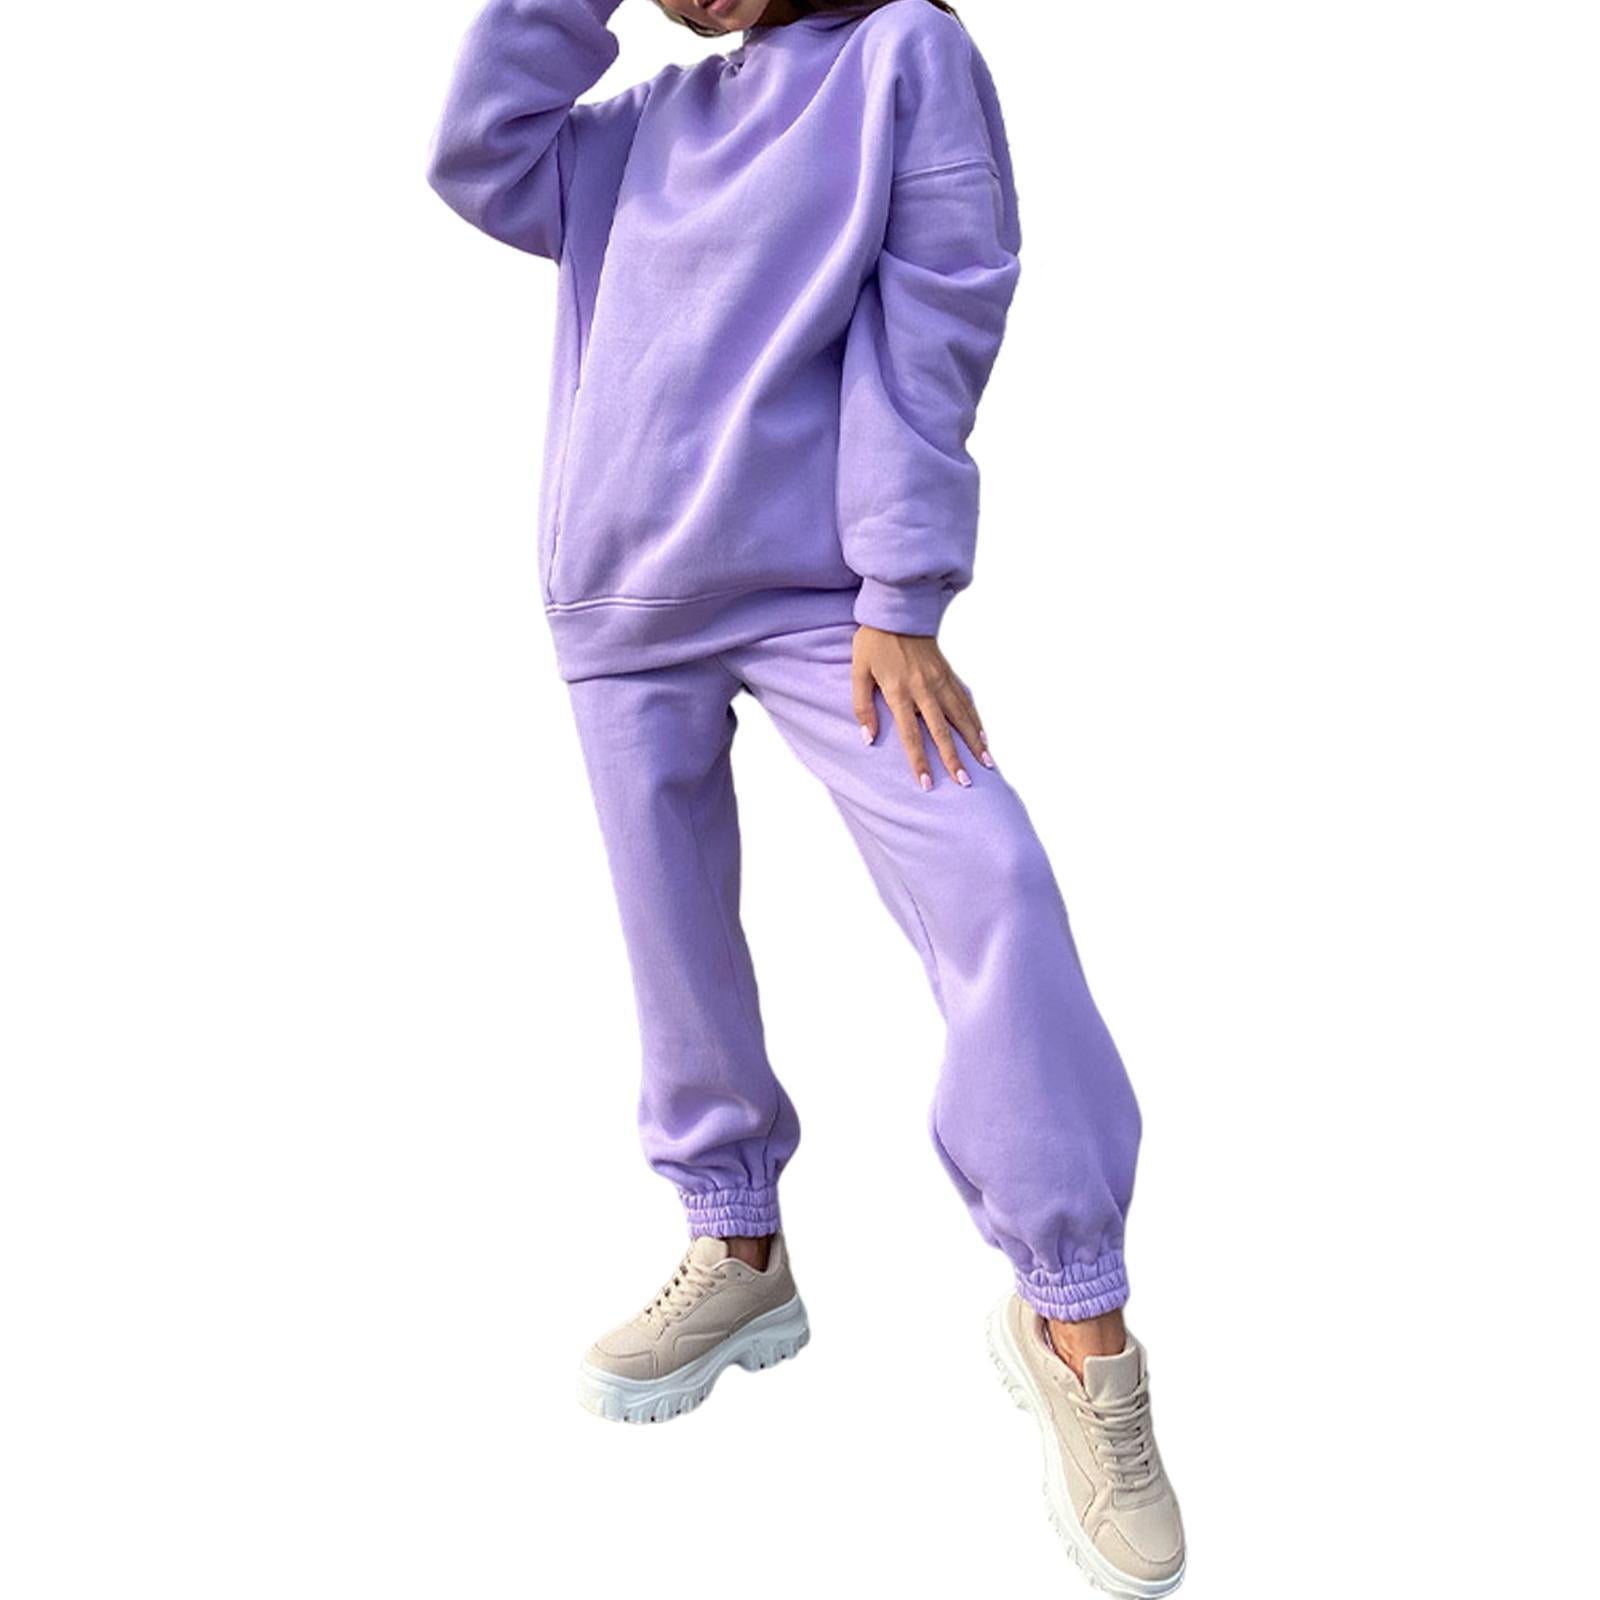 Comfortable Women's Sweatsuit Set Hoodie And Pants Suits Tracksuits Outfits  SX-Large 